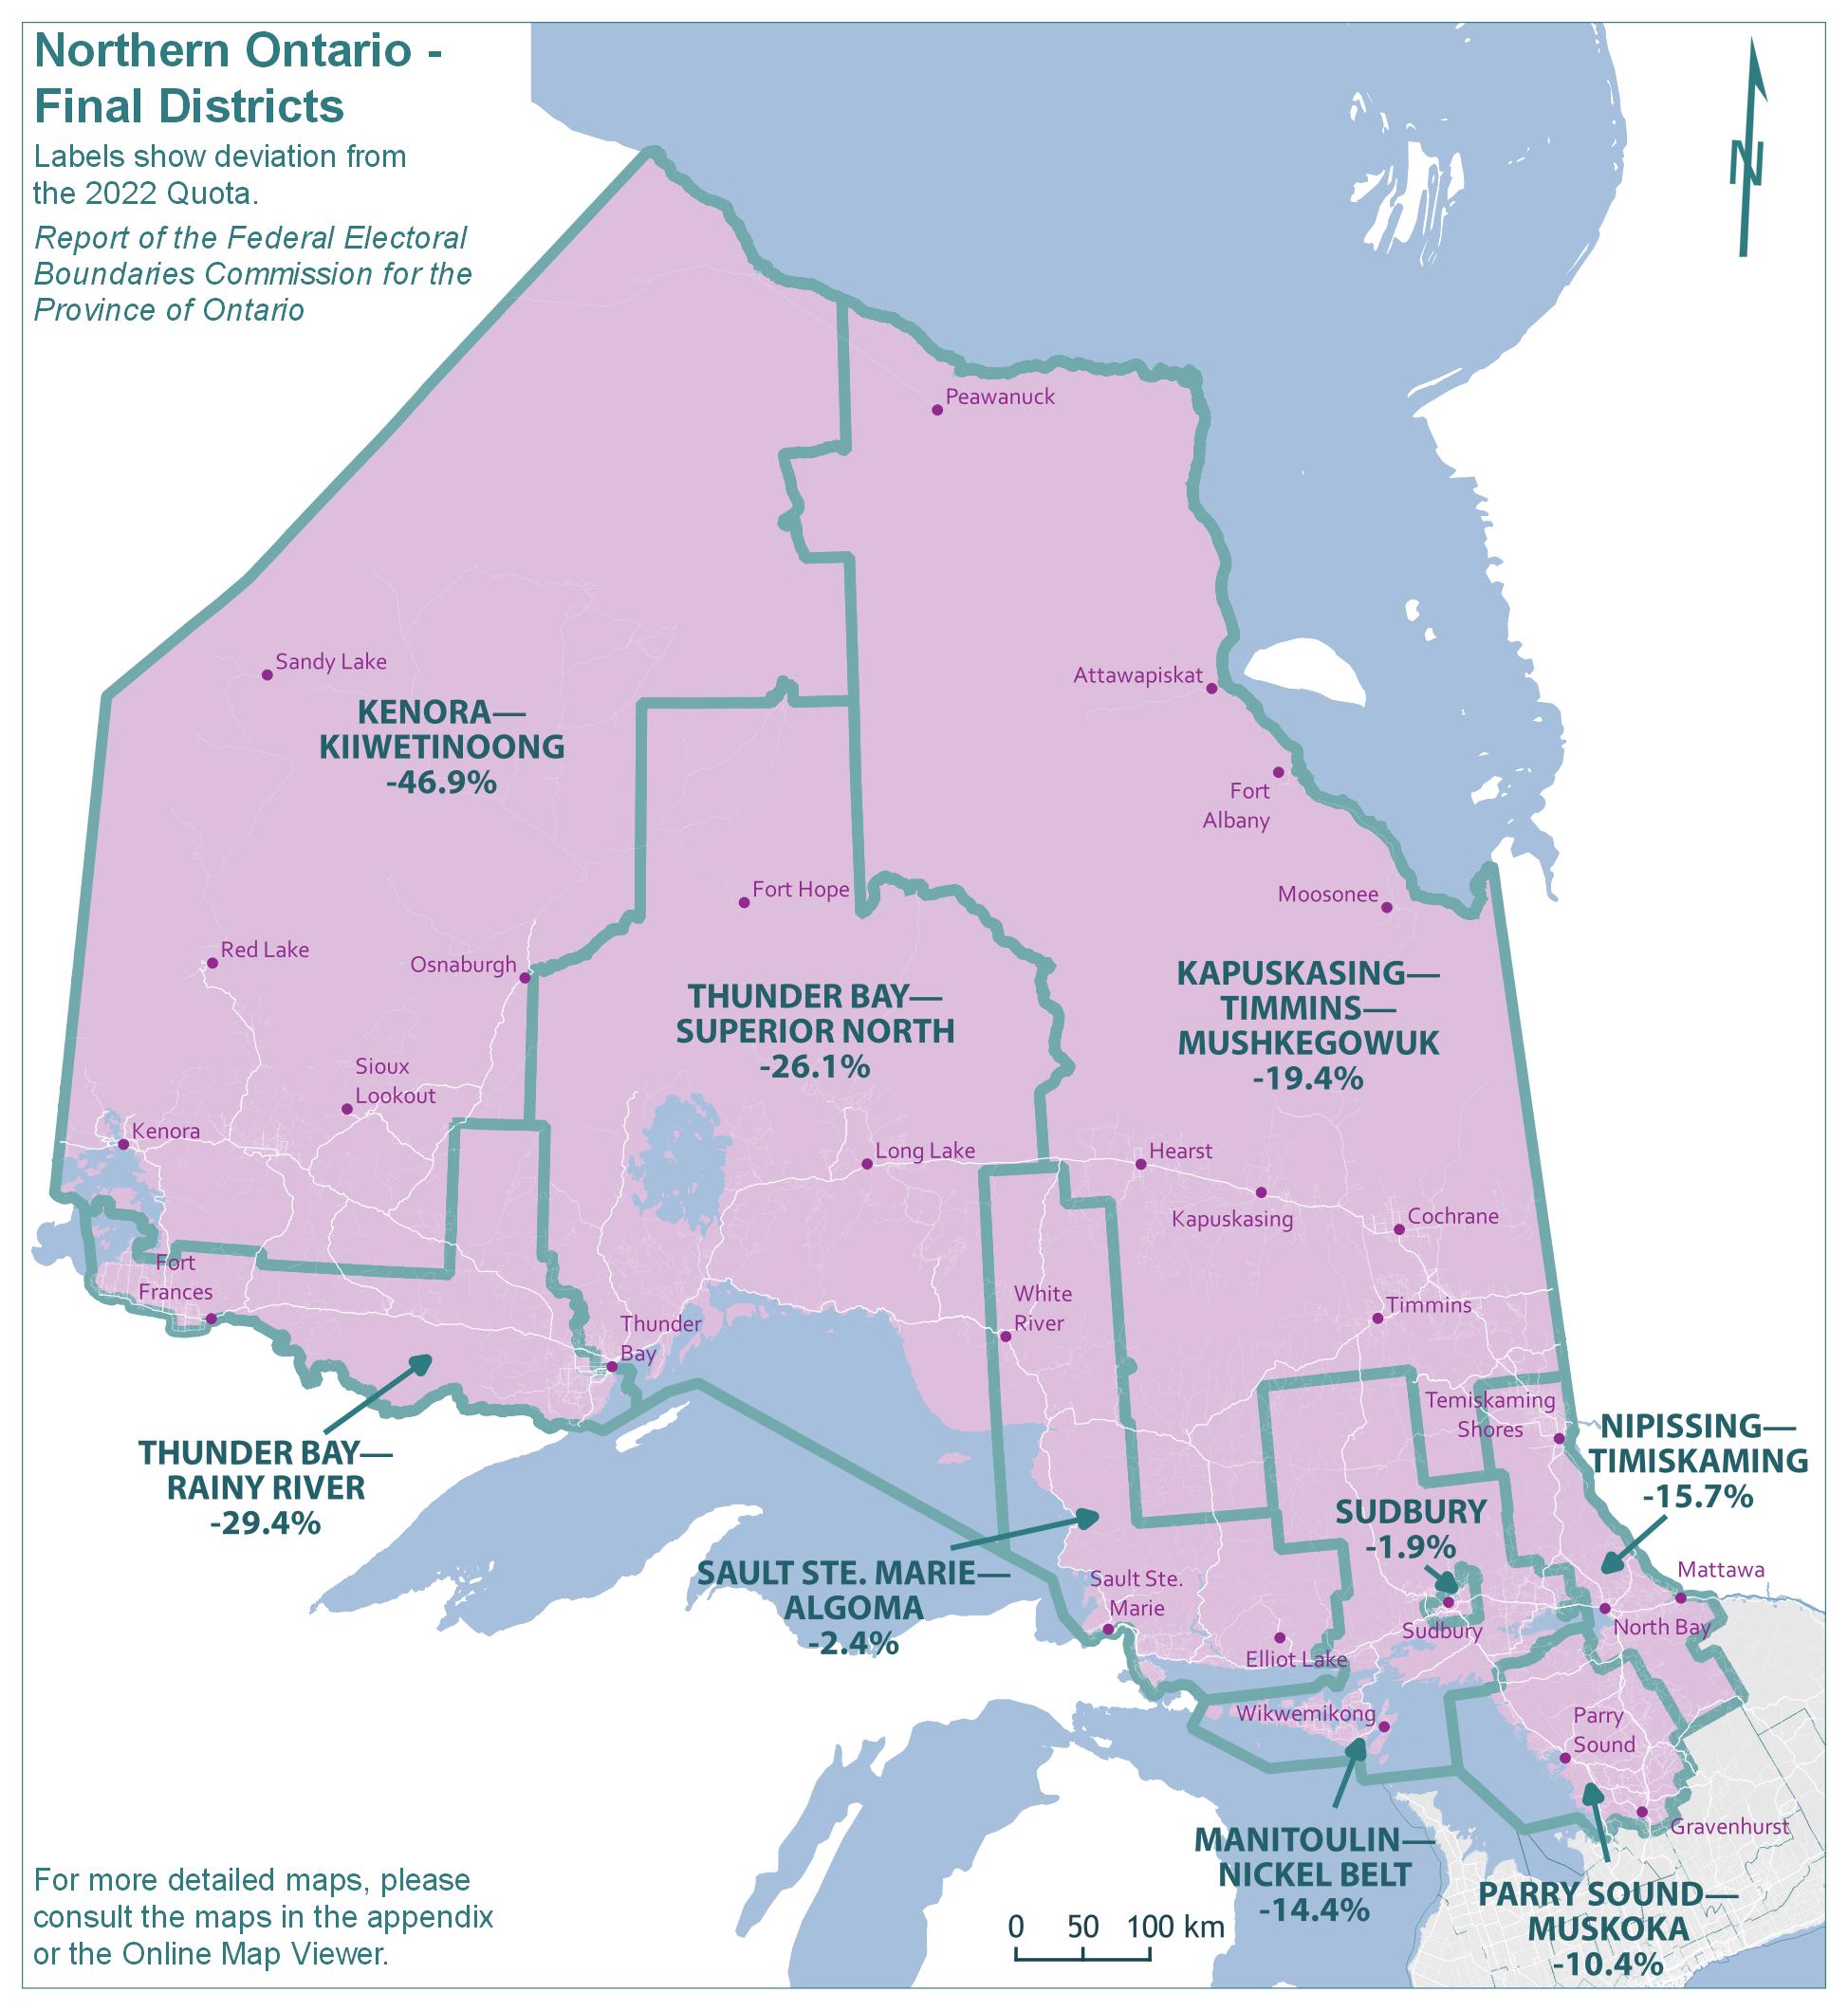 Northern Ontario - Final Districts